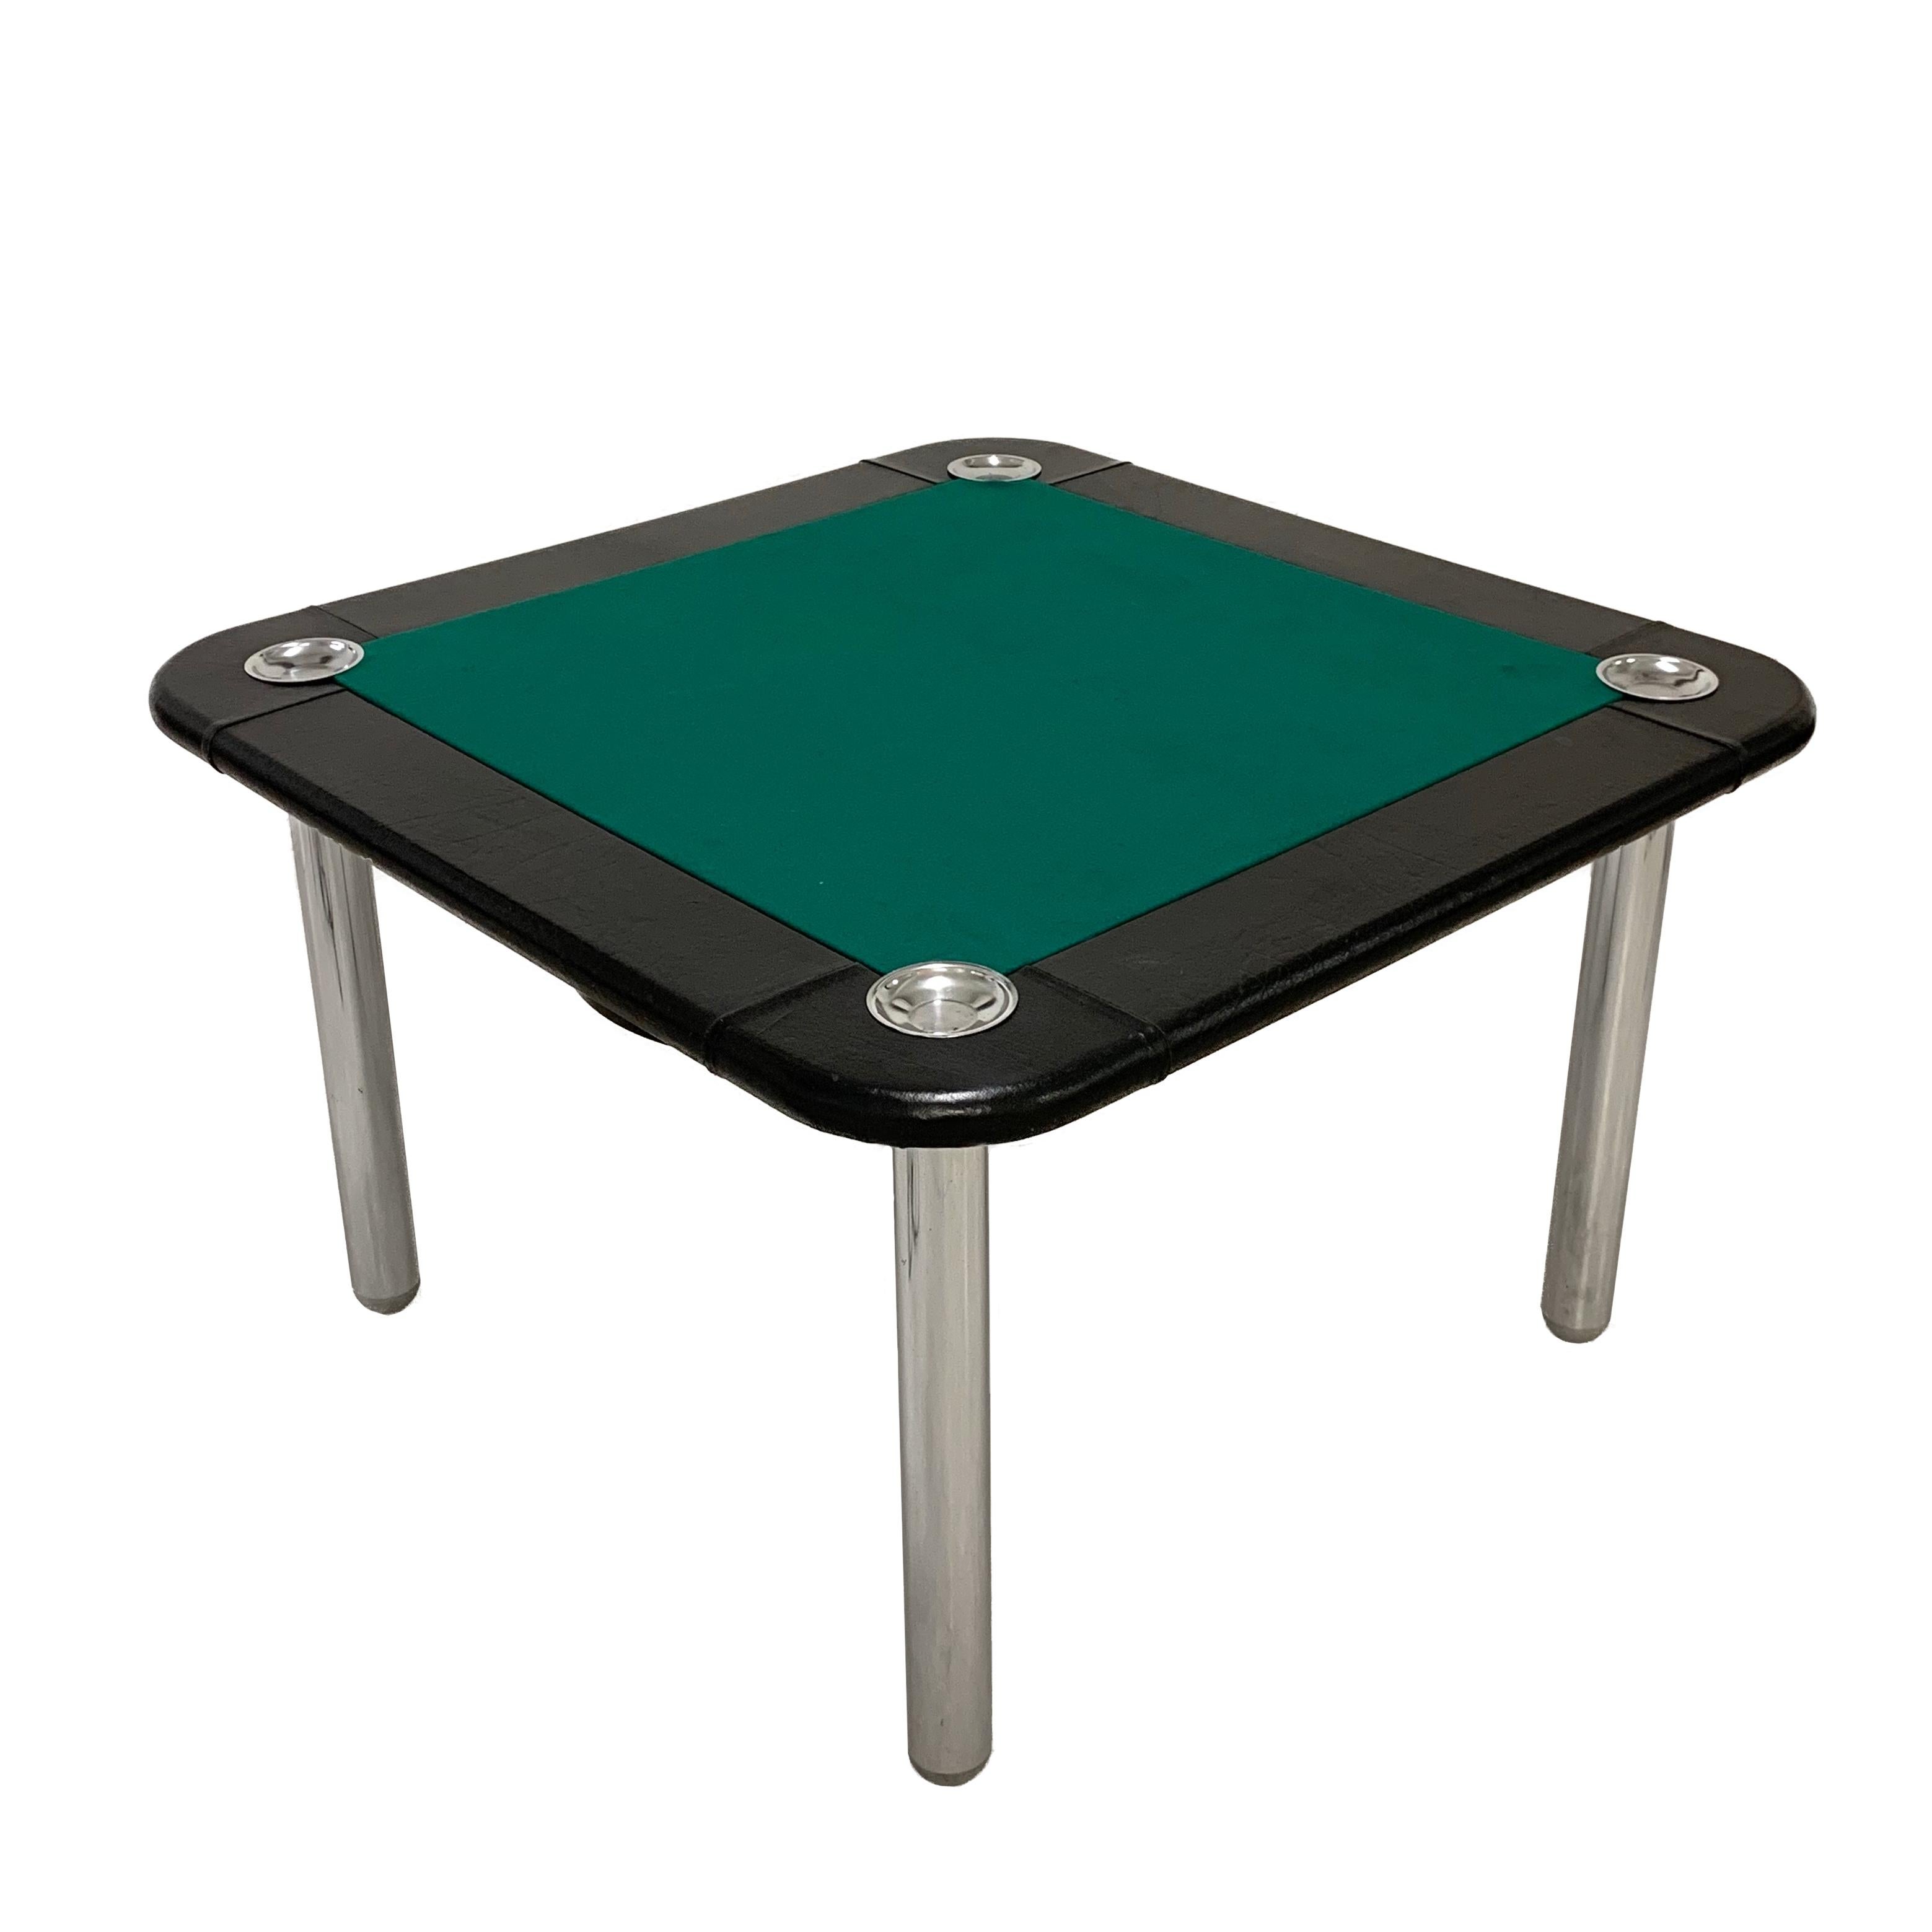 Large midcentury leather and chromed steel game table. This card table was produced in Italy during 1960s and it is attributed to Zanotta.

The top is in new green fabric, black leather edges and four ashtrays. The tubular legs are made of